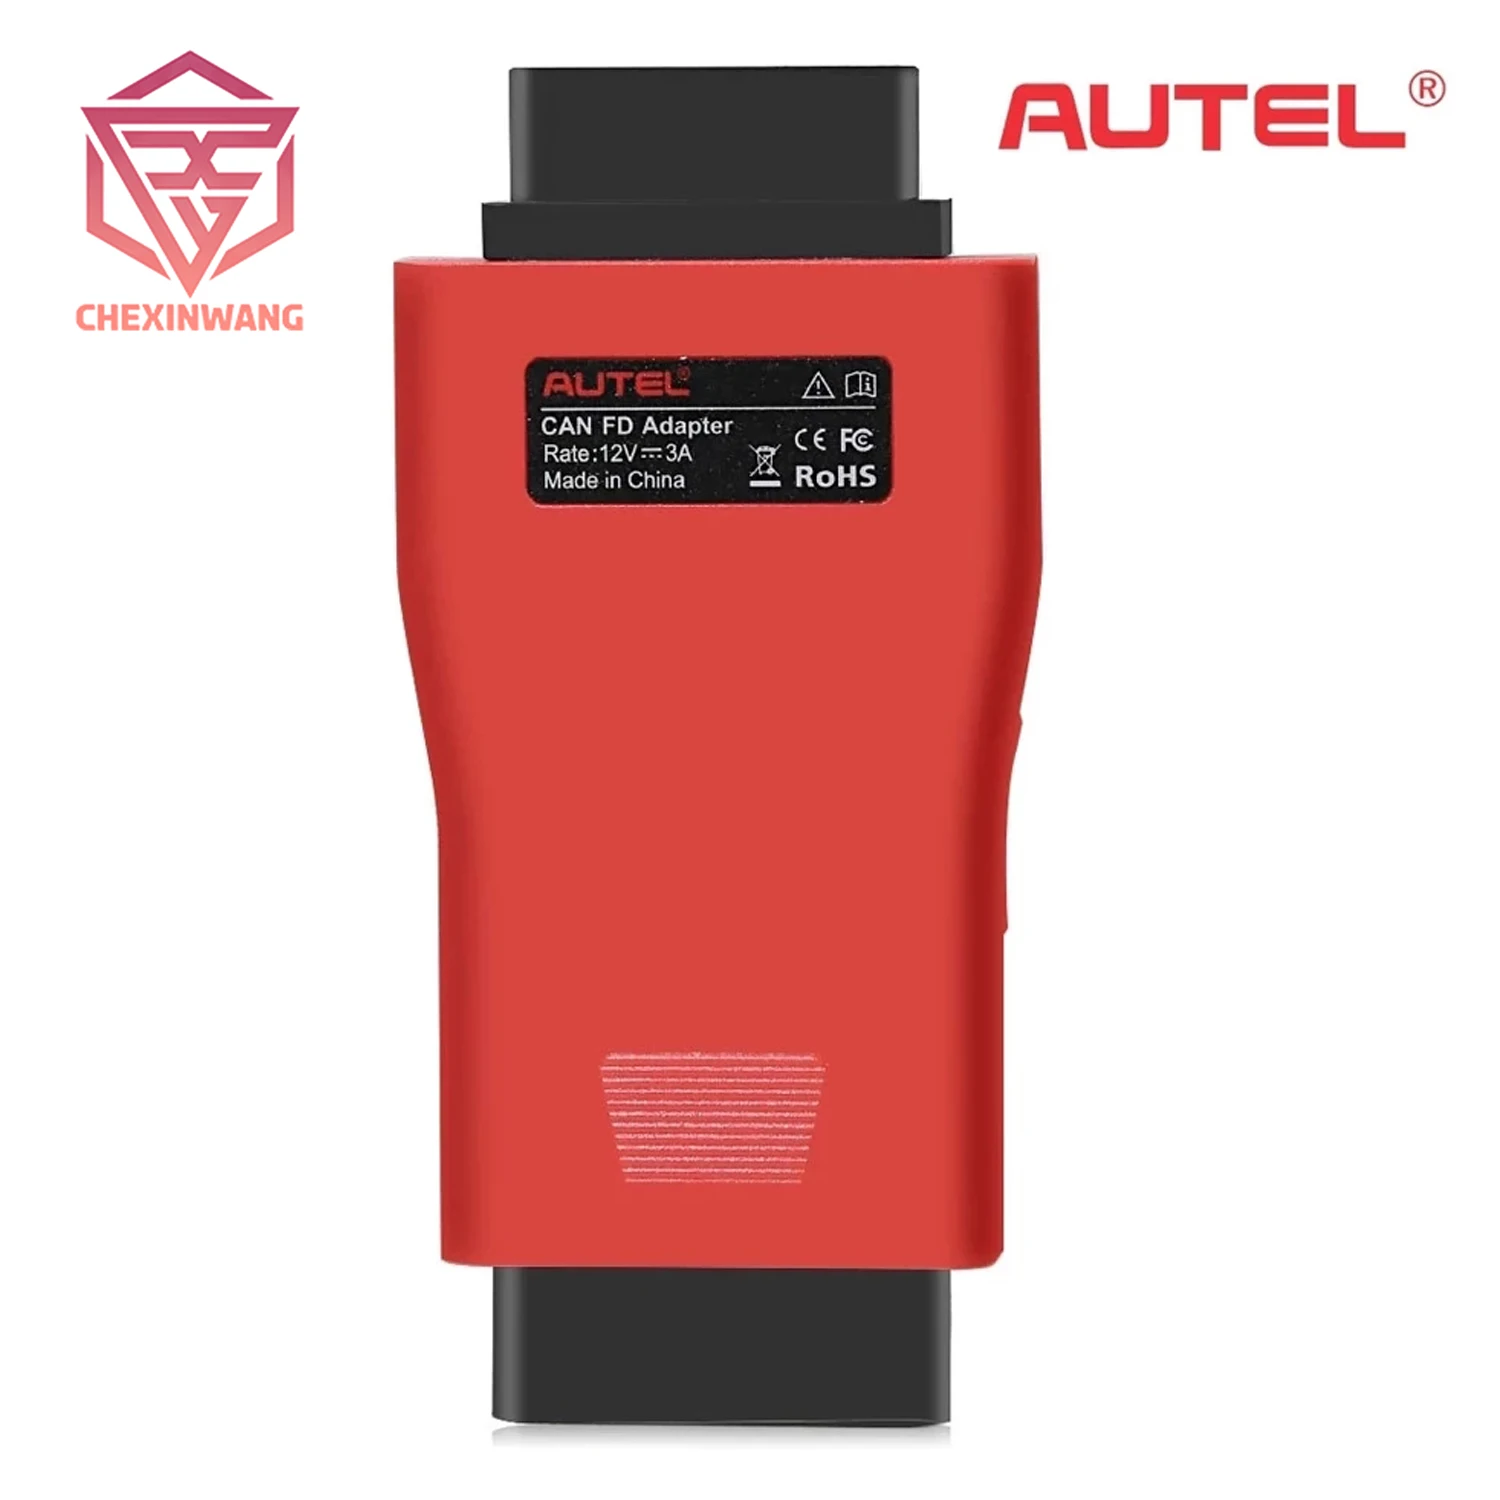 

Original Autel CAN FD Tool CANFD Adapter Supports CAN FD Protocol Models For MY2020 G-M Work with MAXIFLASH VCI VCI100 VCI MINI